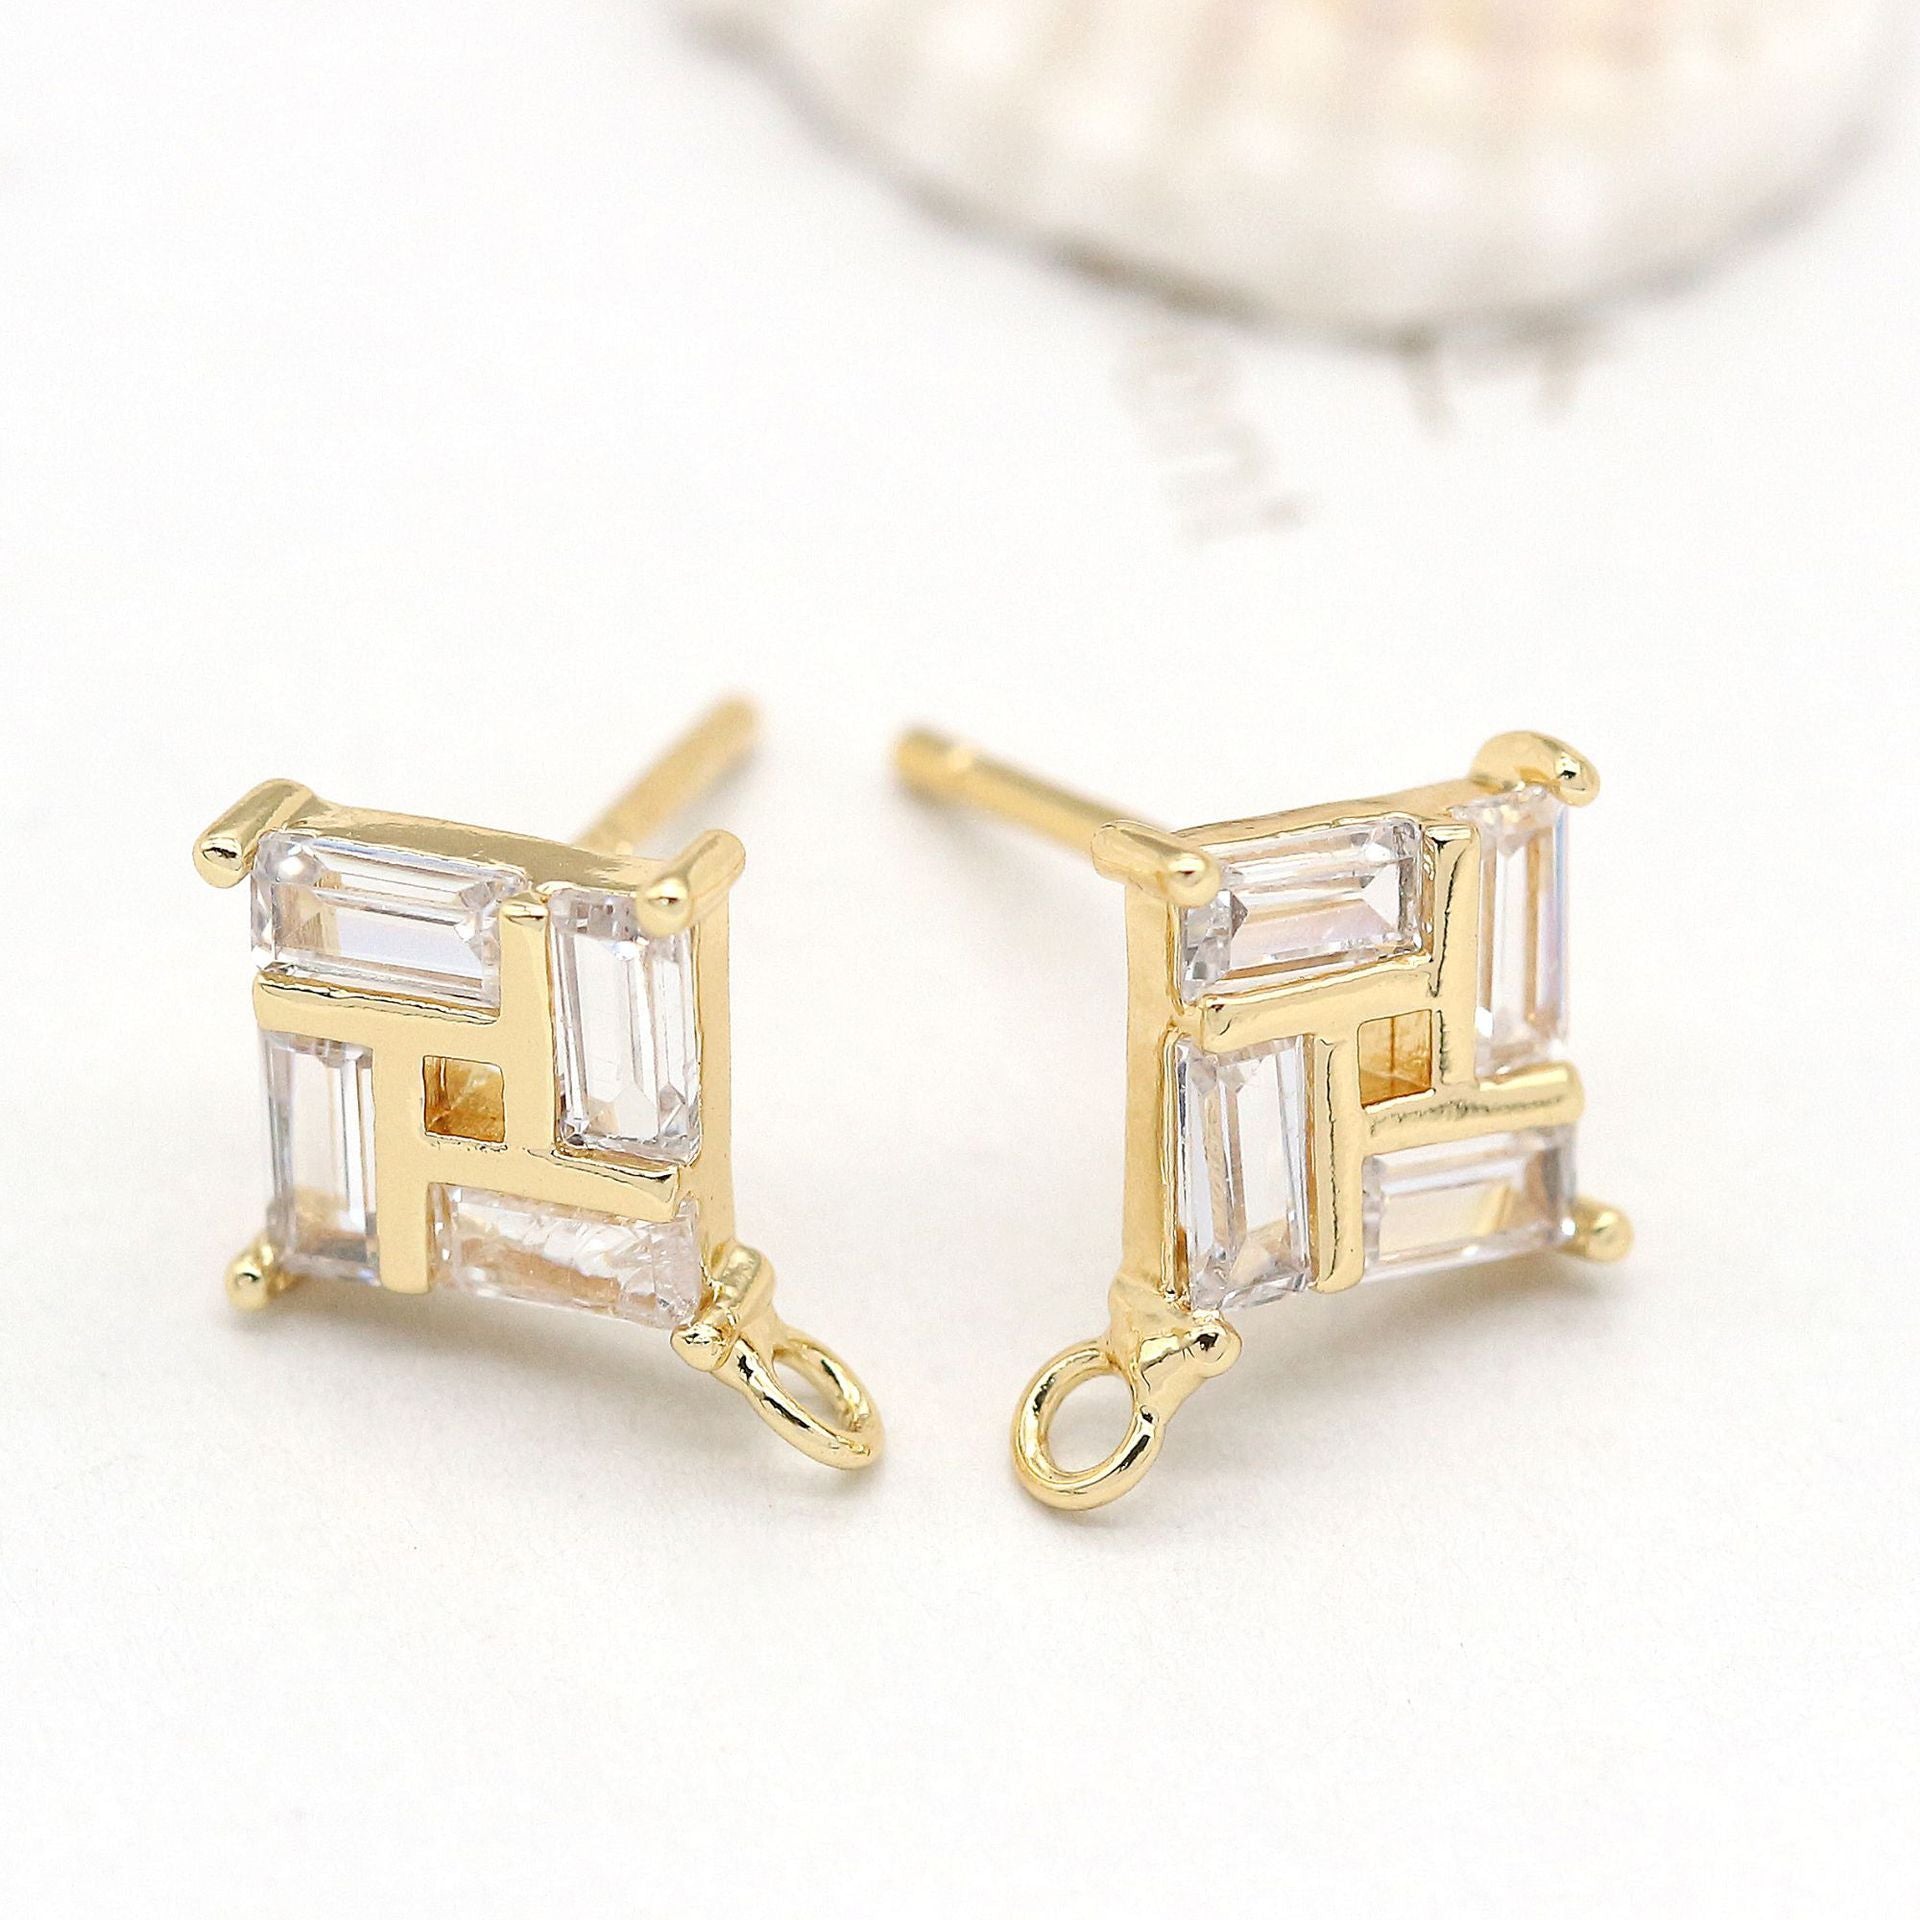 Stone Plated 14K Real Gold Earrings - Plush Fashions Shop 